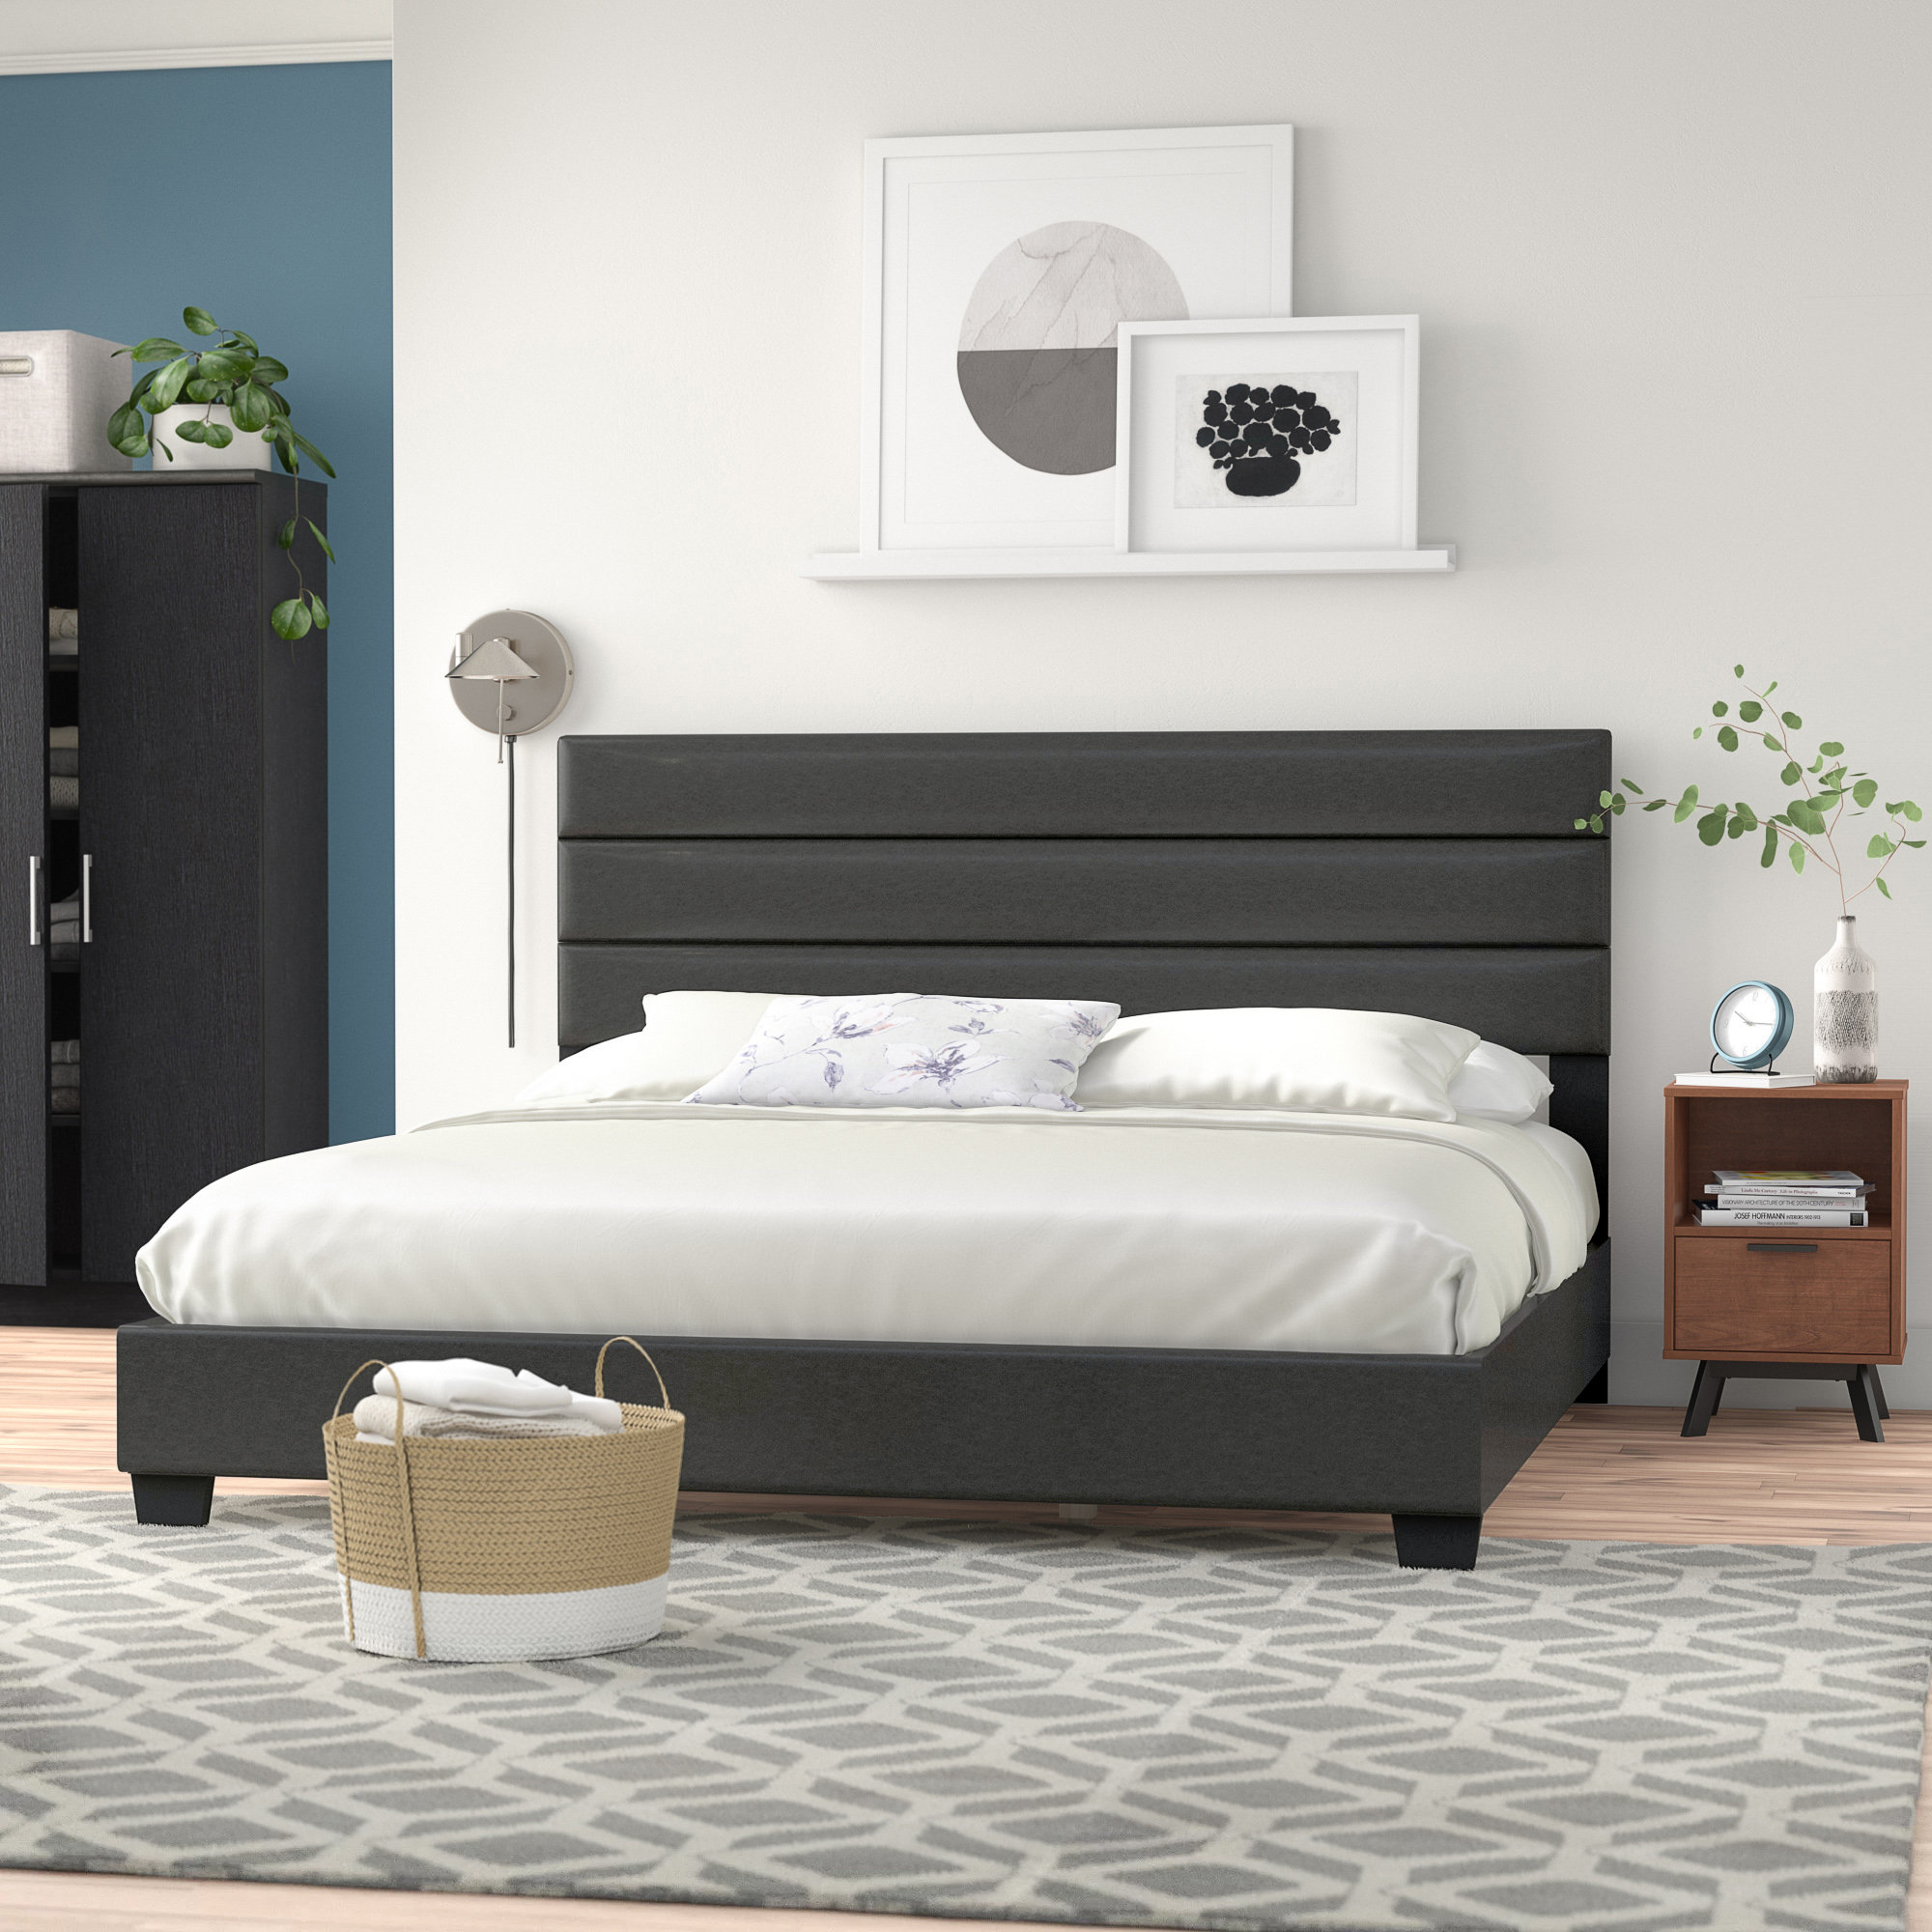 How Big Should My Room Be For A King Size Bed? – ThingzContemporary